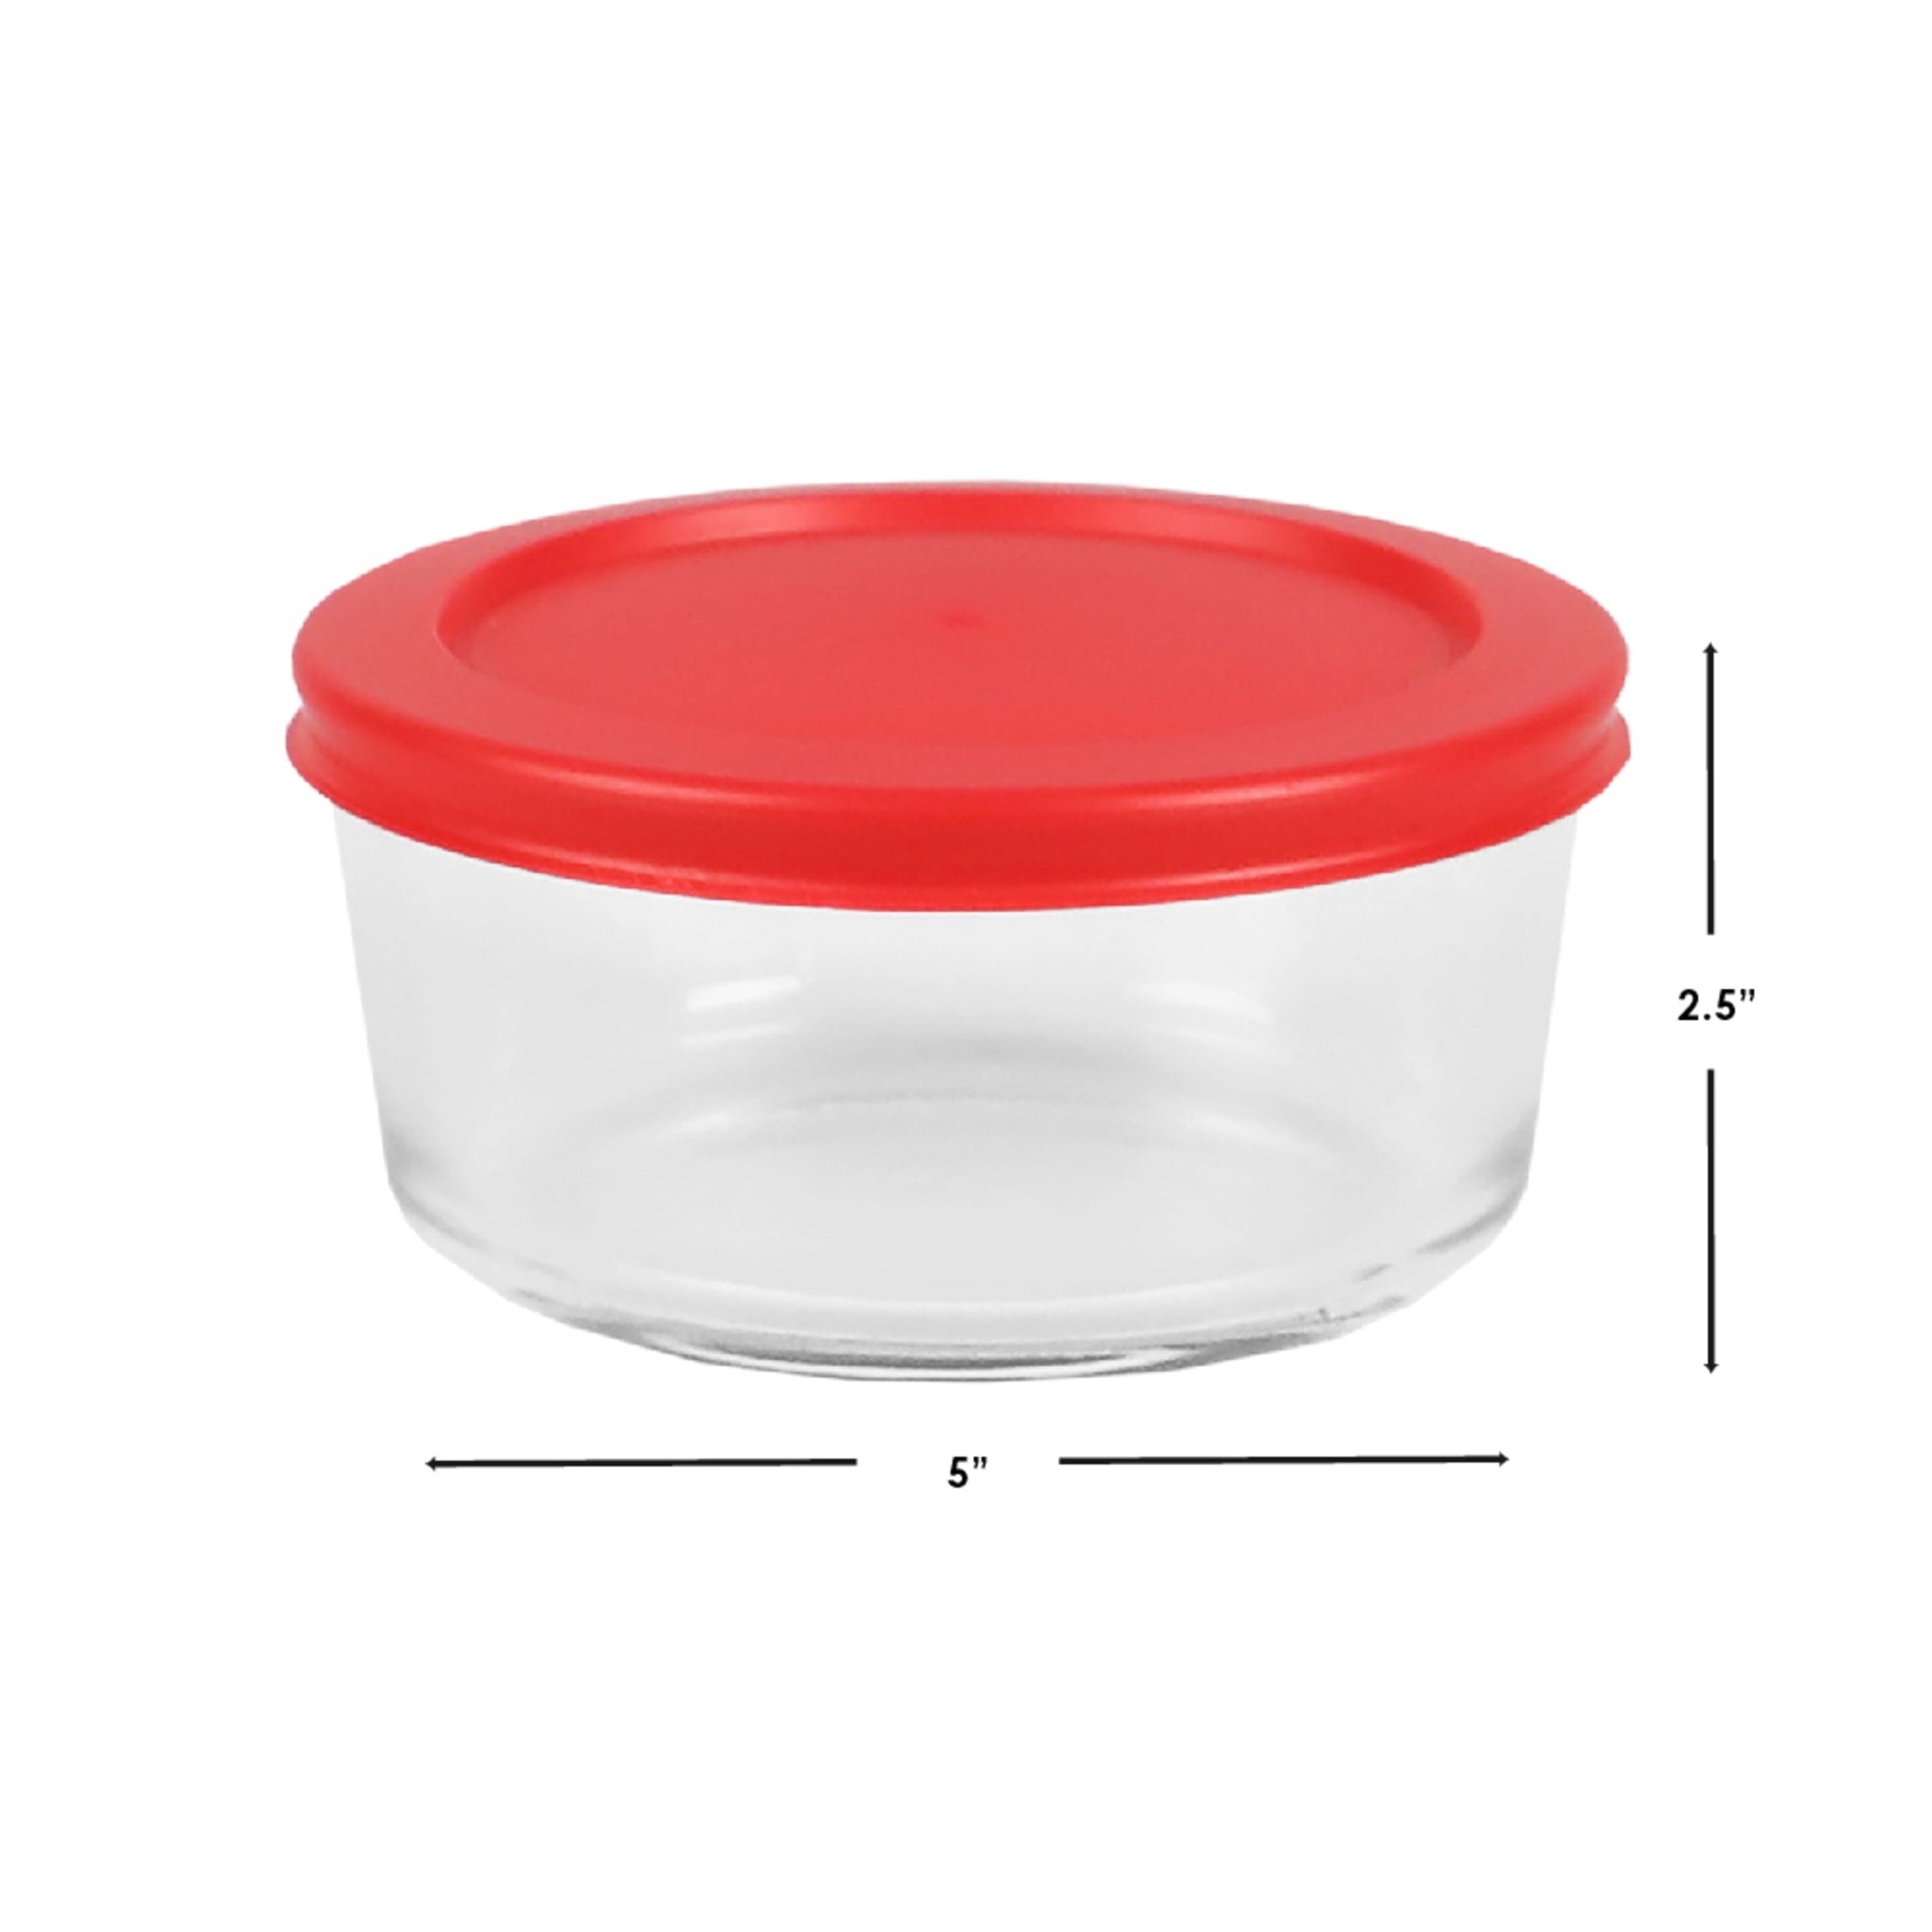 Home Basics 16 oz. Round Glass Food Storage Container with Red Lid, Clear $2.50 EACH, CASE PACK OF 12